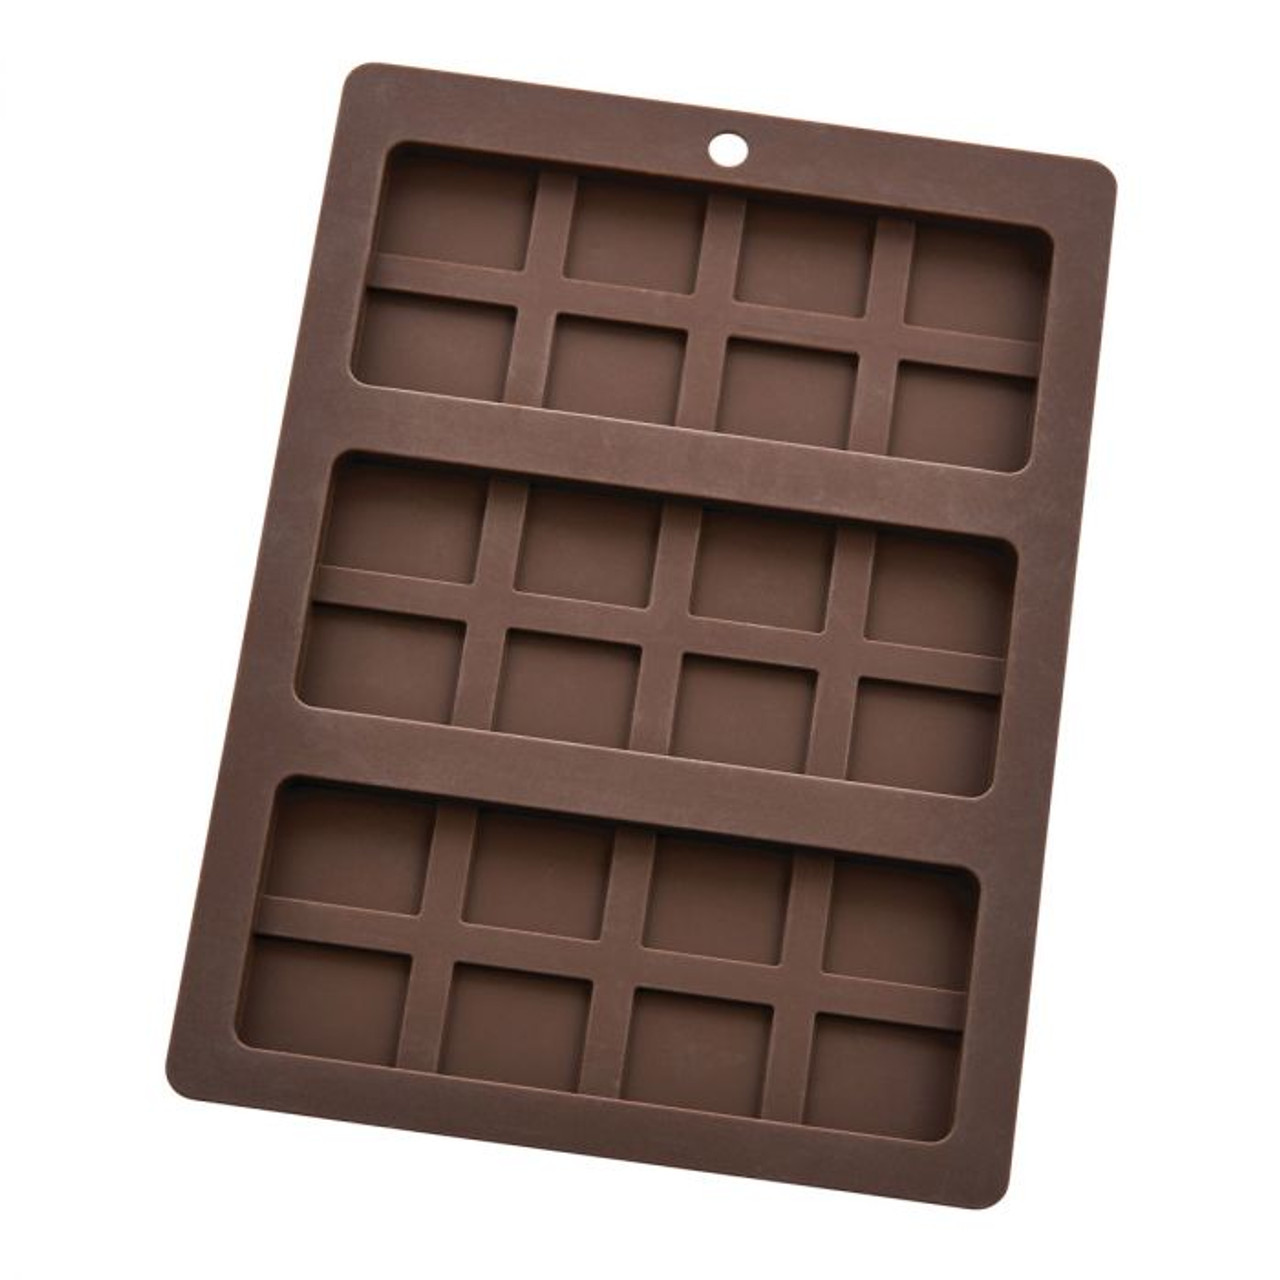 Silicone 3 Candy Bar Mold 5.25x1.25x.25 each - Fante's Kitchen